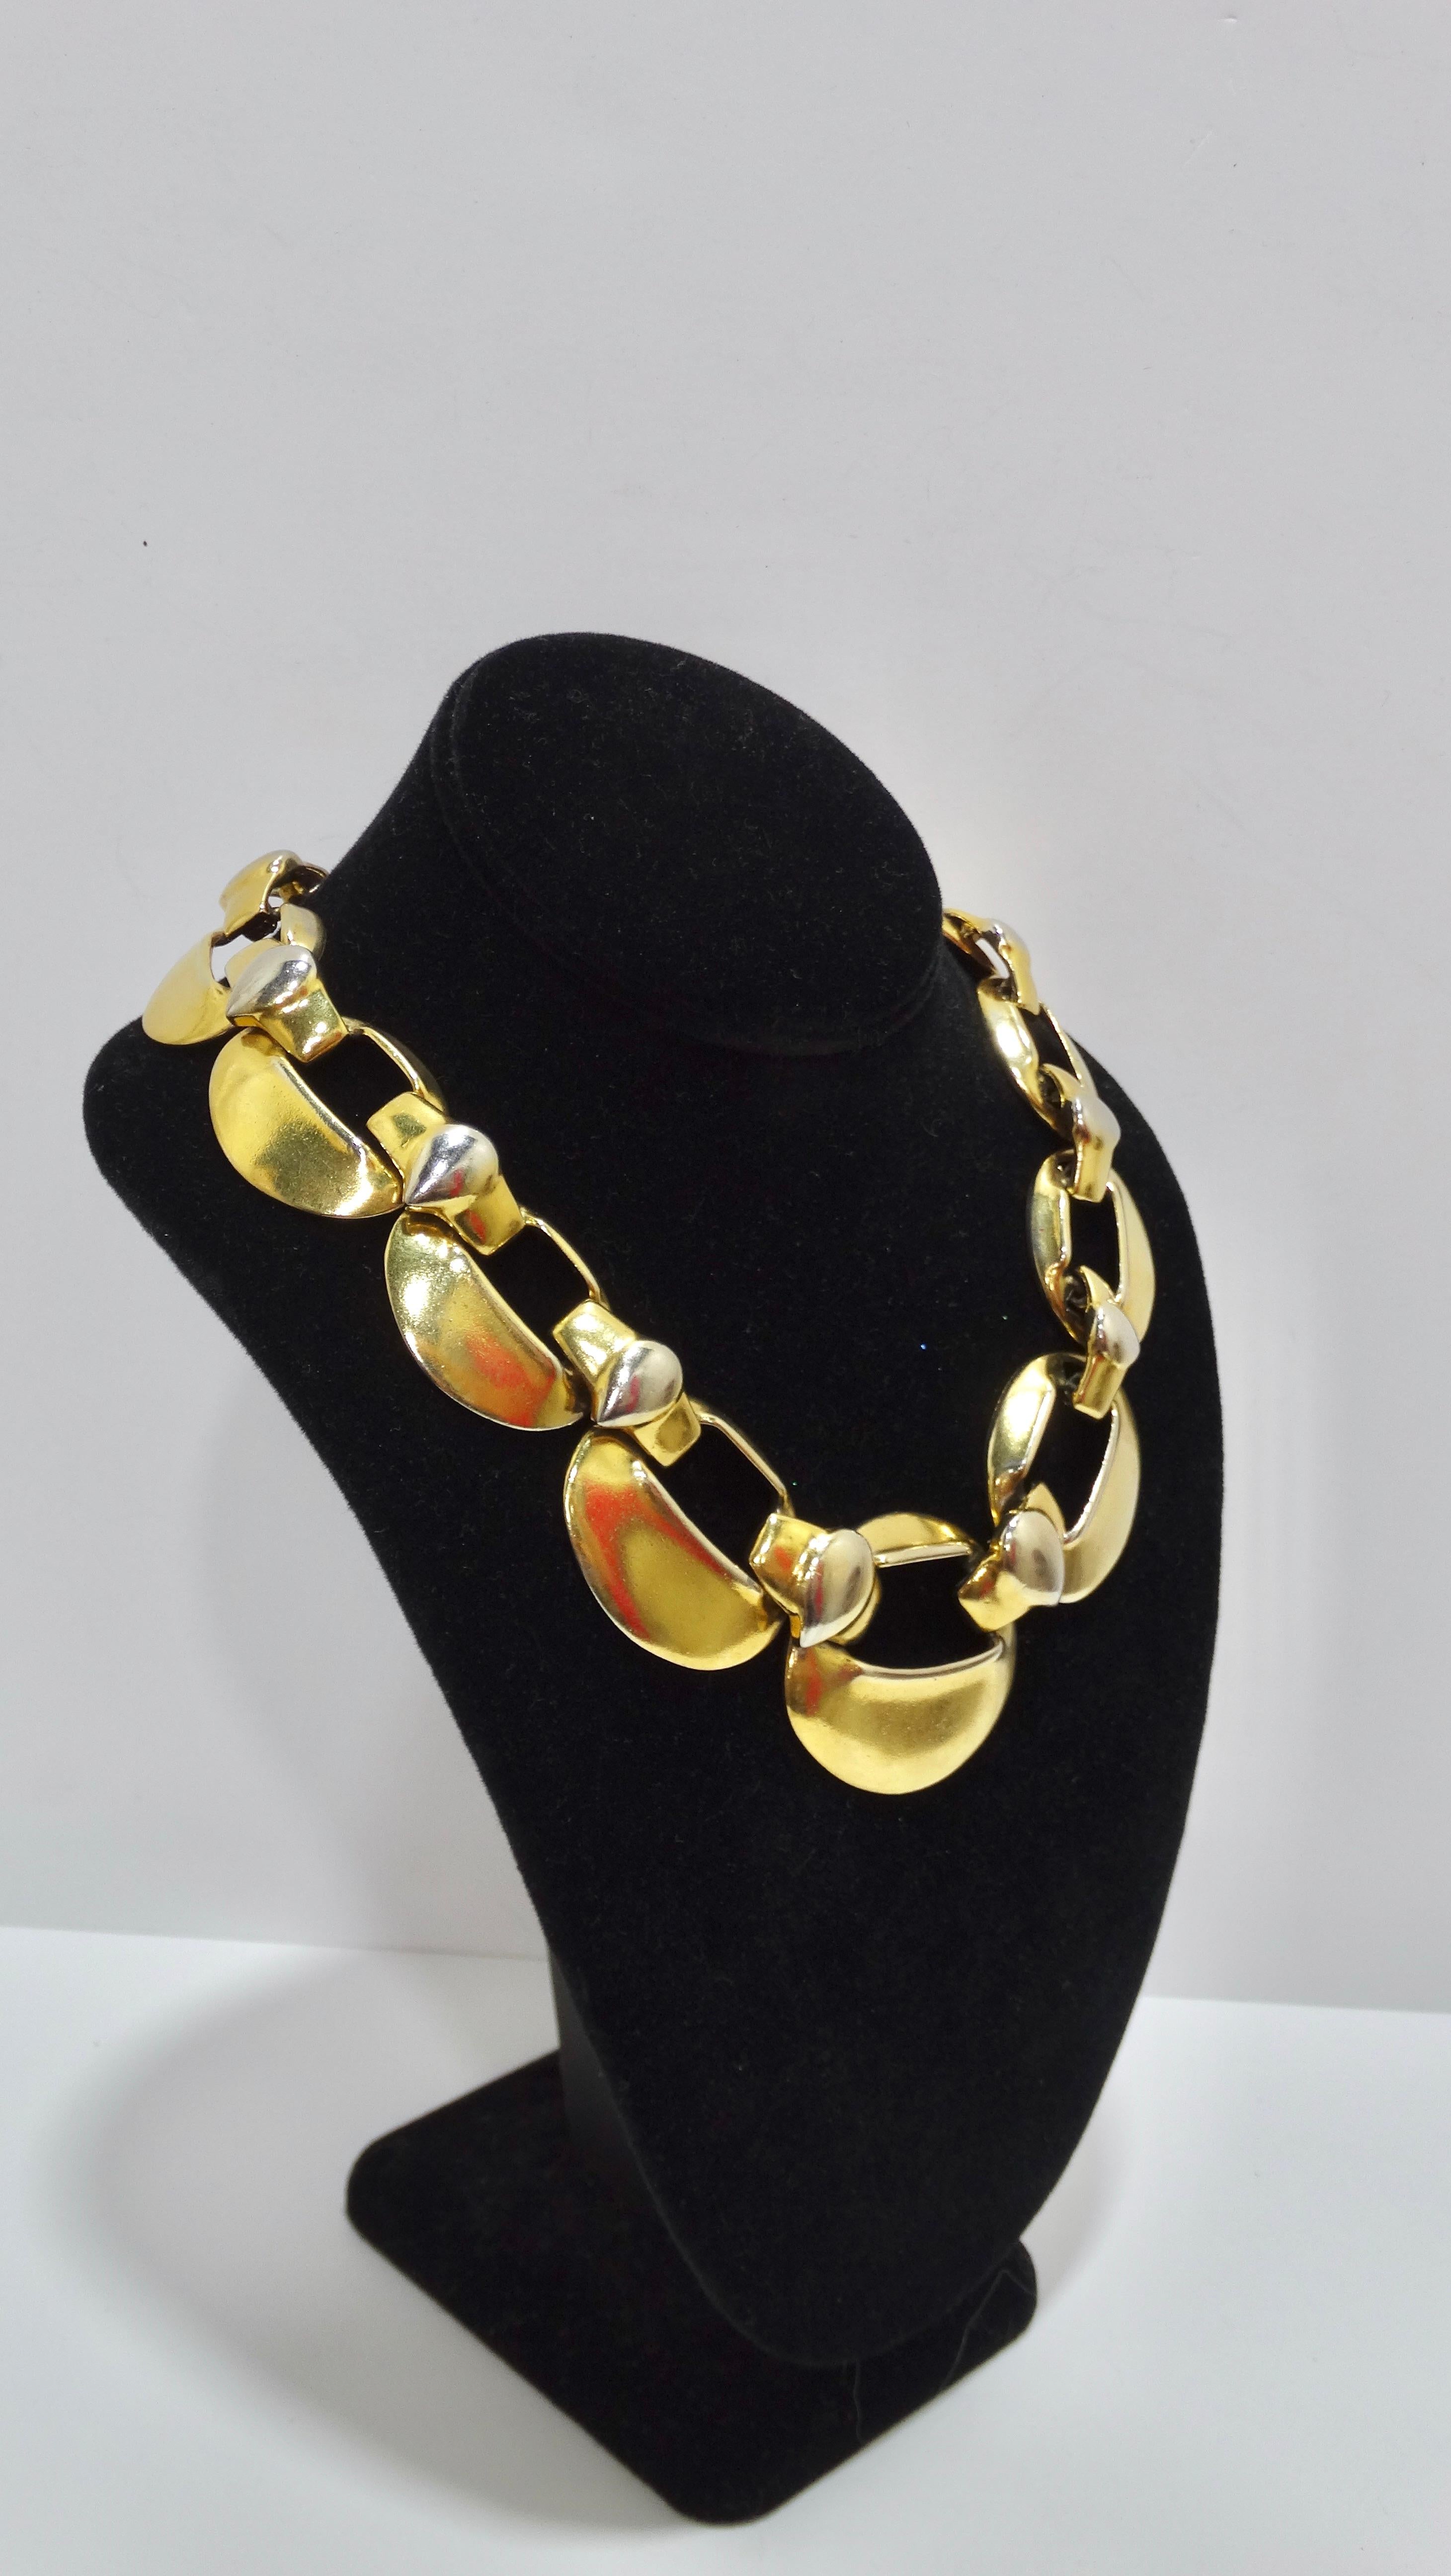 Yves Saint Laurent Runway Chunky Gold Link Necklace In Excellent Condition For Sale In Scottsdale, AZ